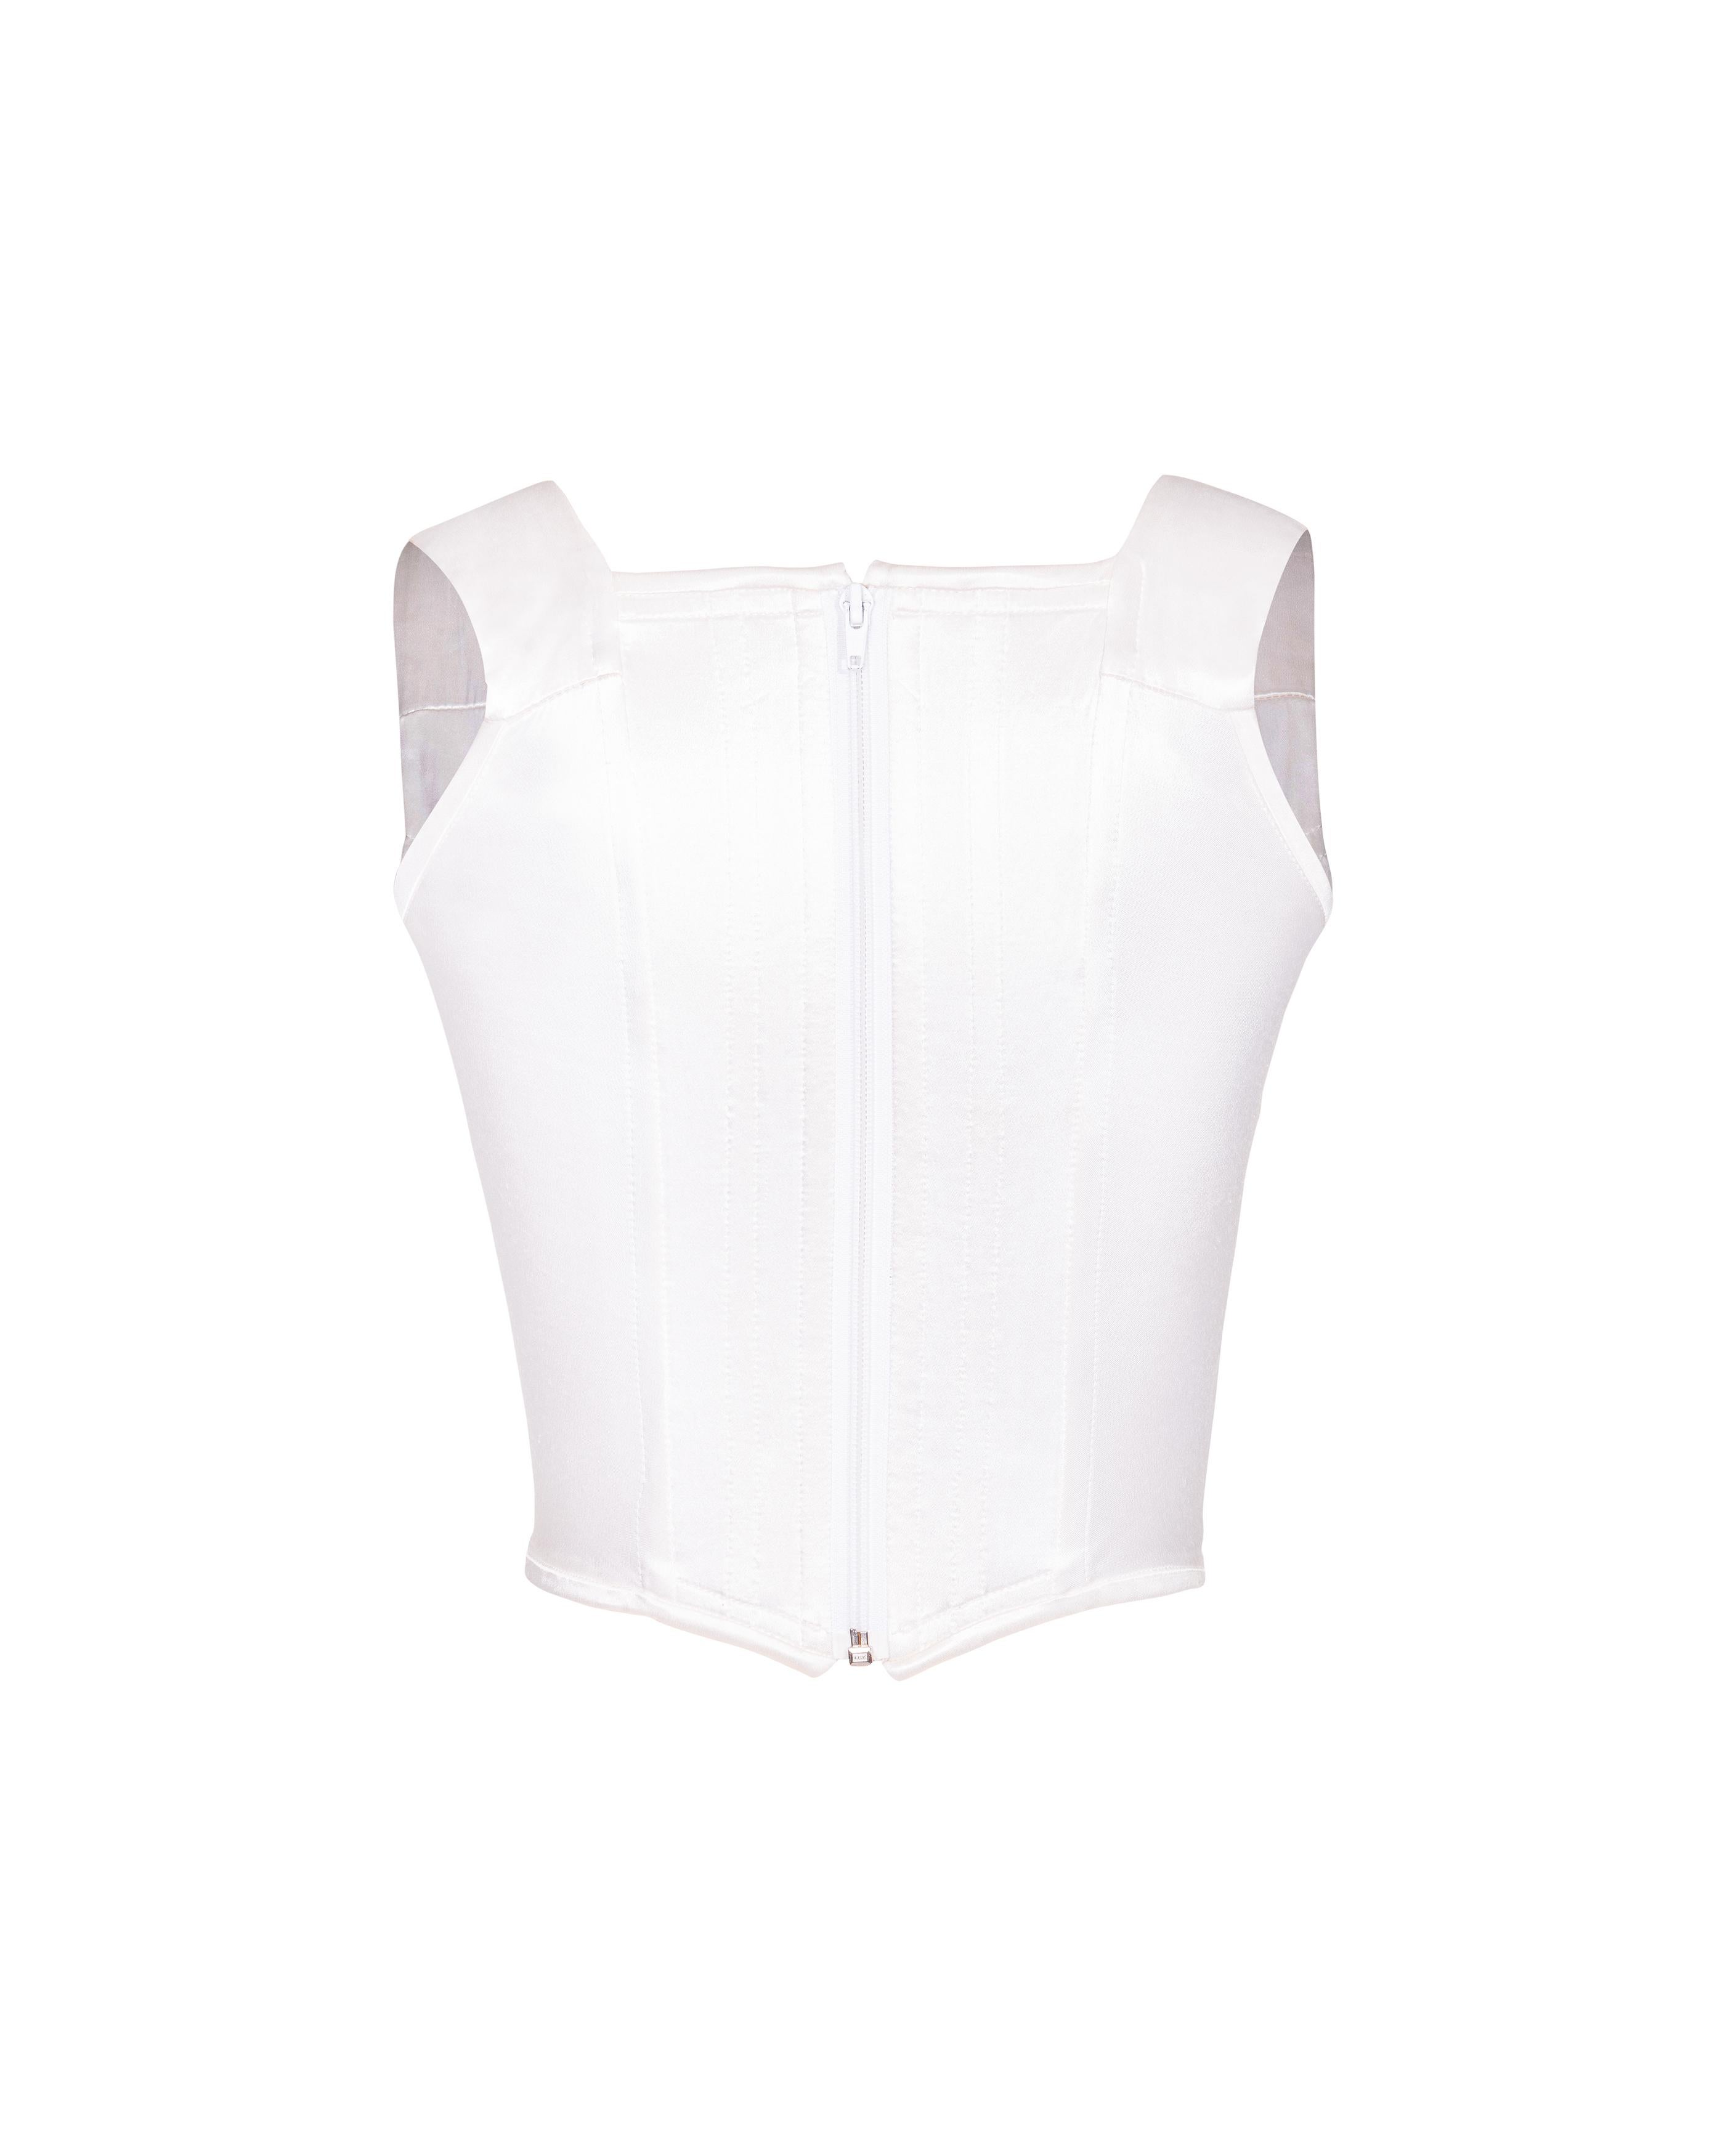 S/S 1991 Vivienne Westwood White Satin Corset In Good Condition In North Hollywood, CA